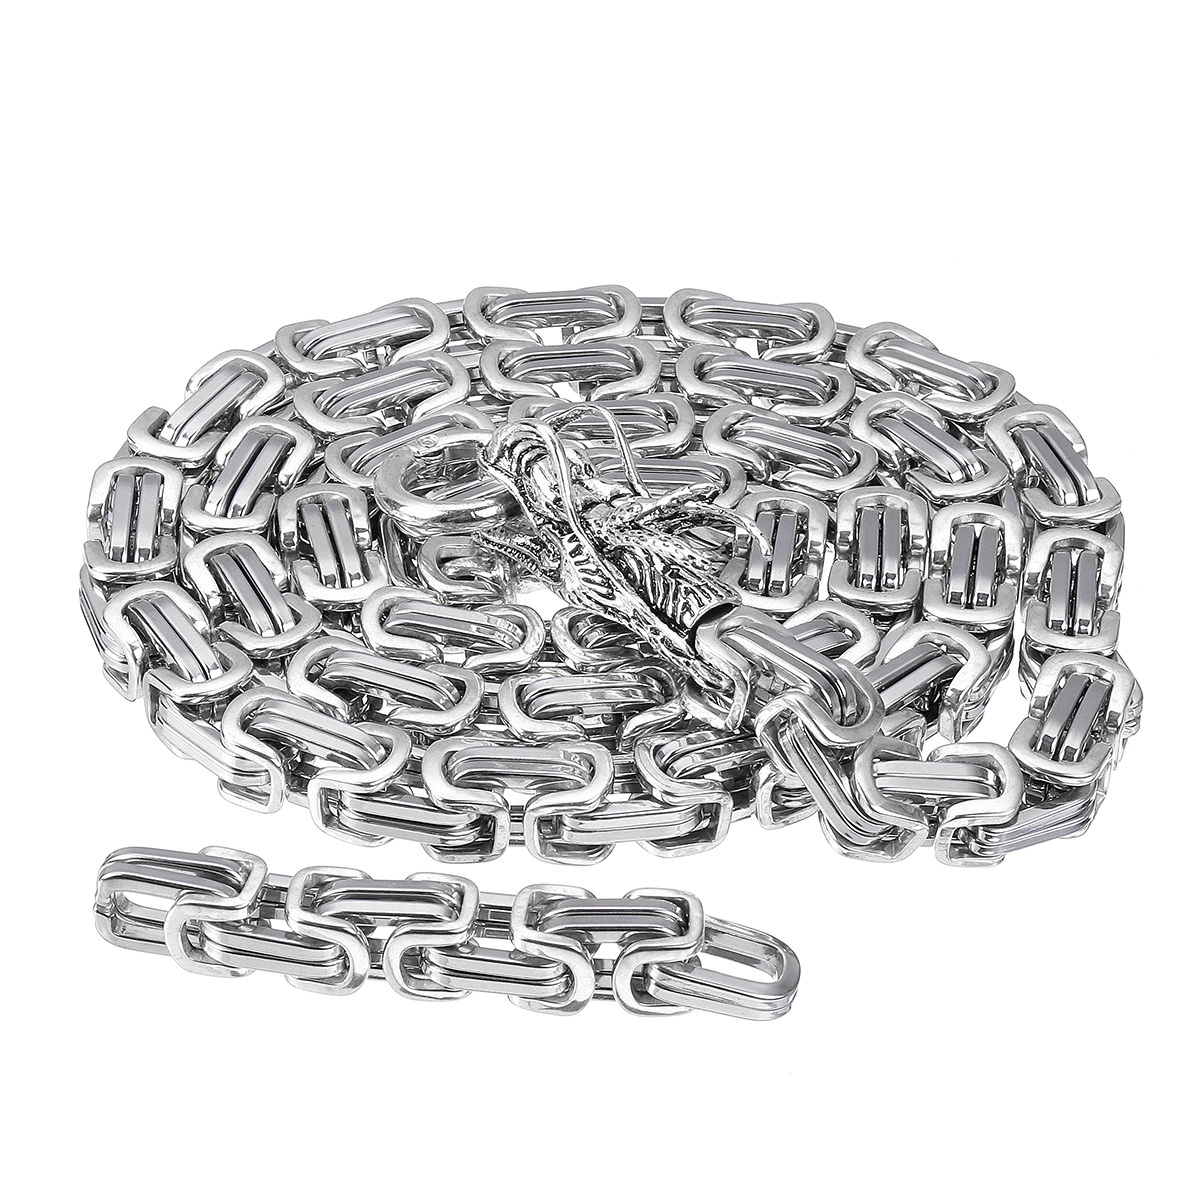 6-Type-Titanium-Steel-Keel-Self-protecion-Arms-Necklace-Tactical-Whip-Waist-Chain-1534787-10